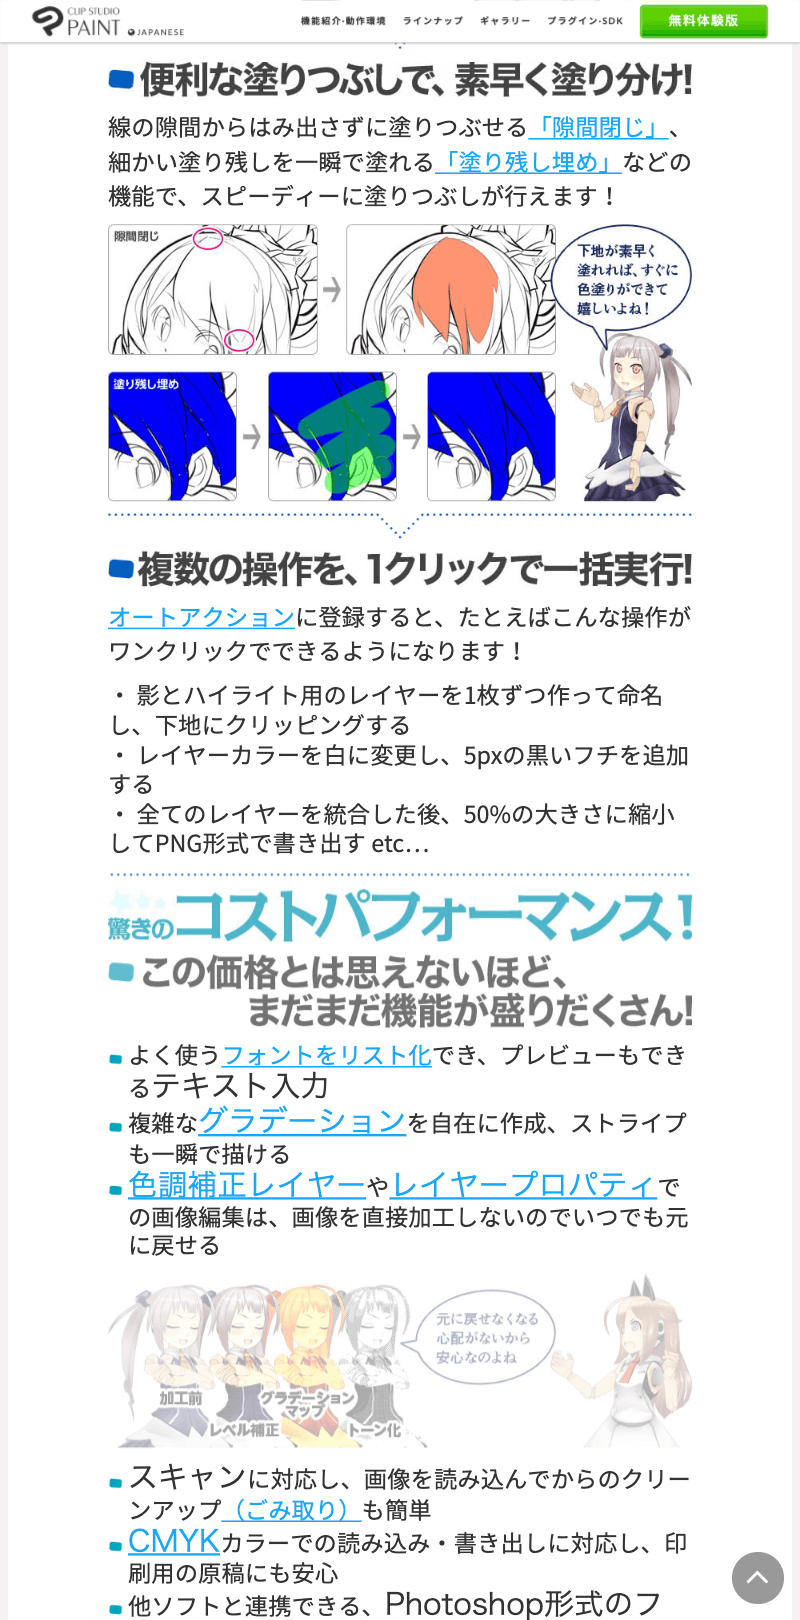 Clip Paint クリップペイント を不動産屋が買ってみた